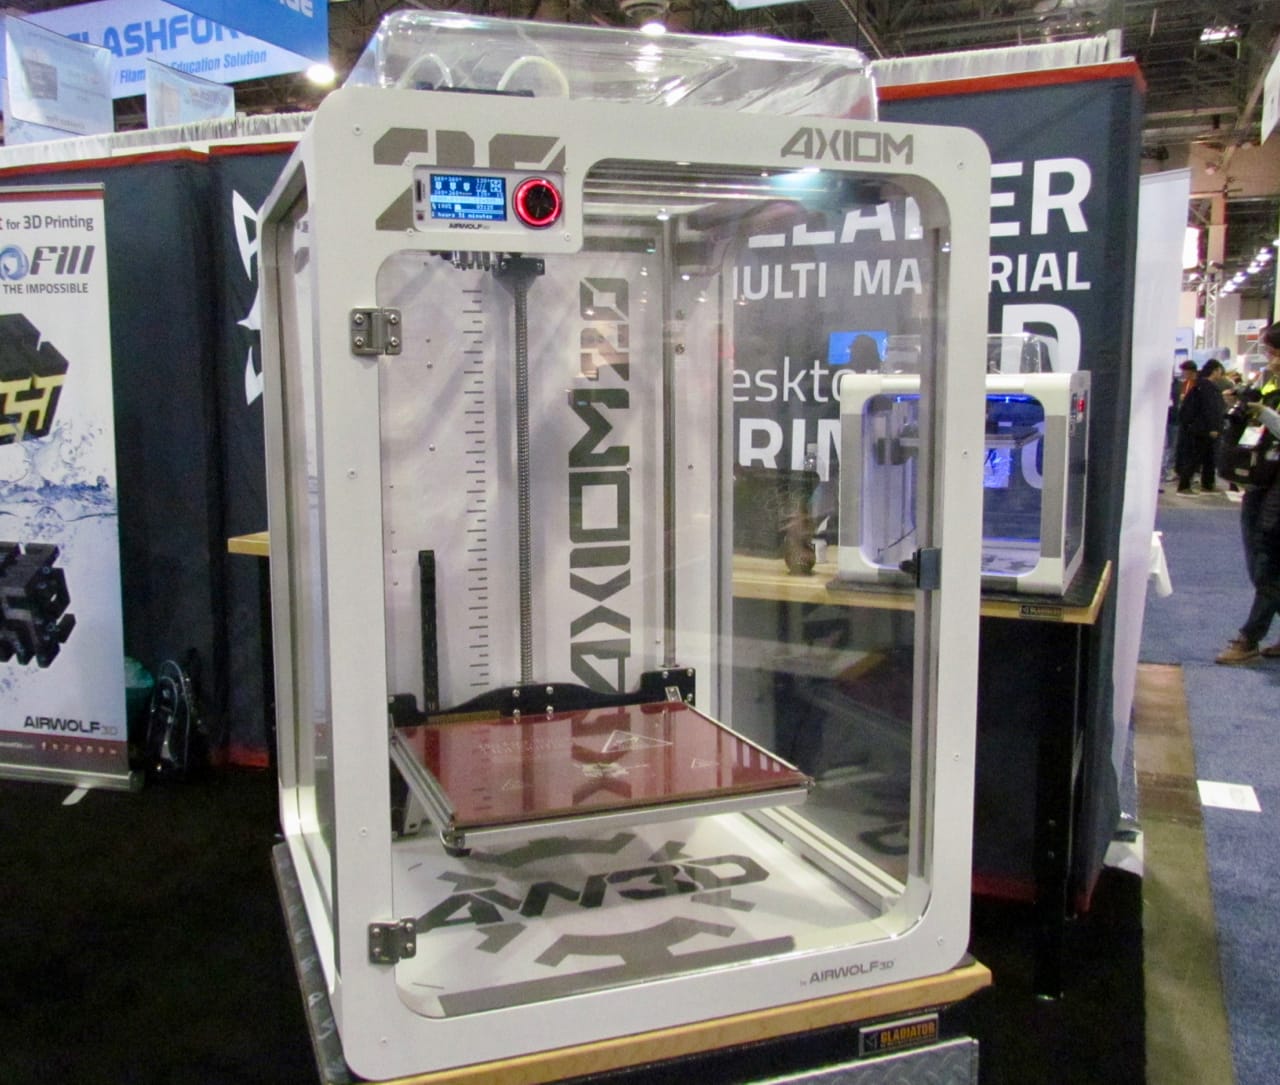  A typical professional desktop 3D printer system from AirWolf3D 